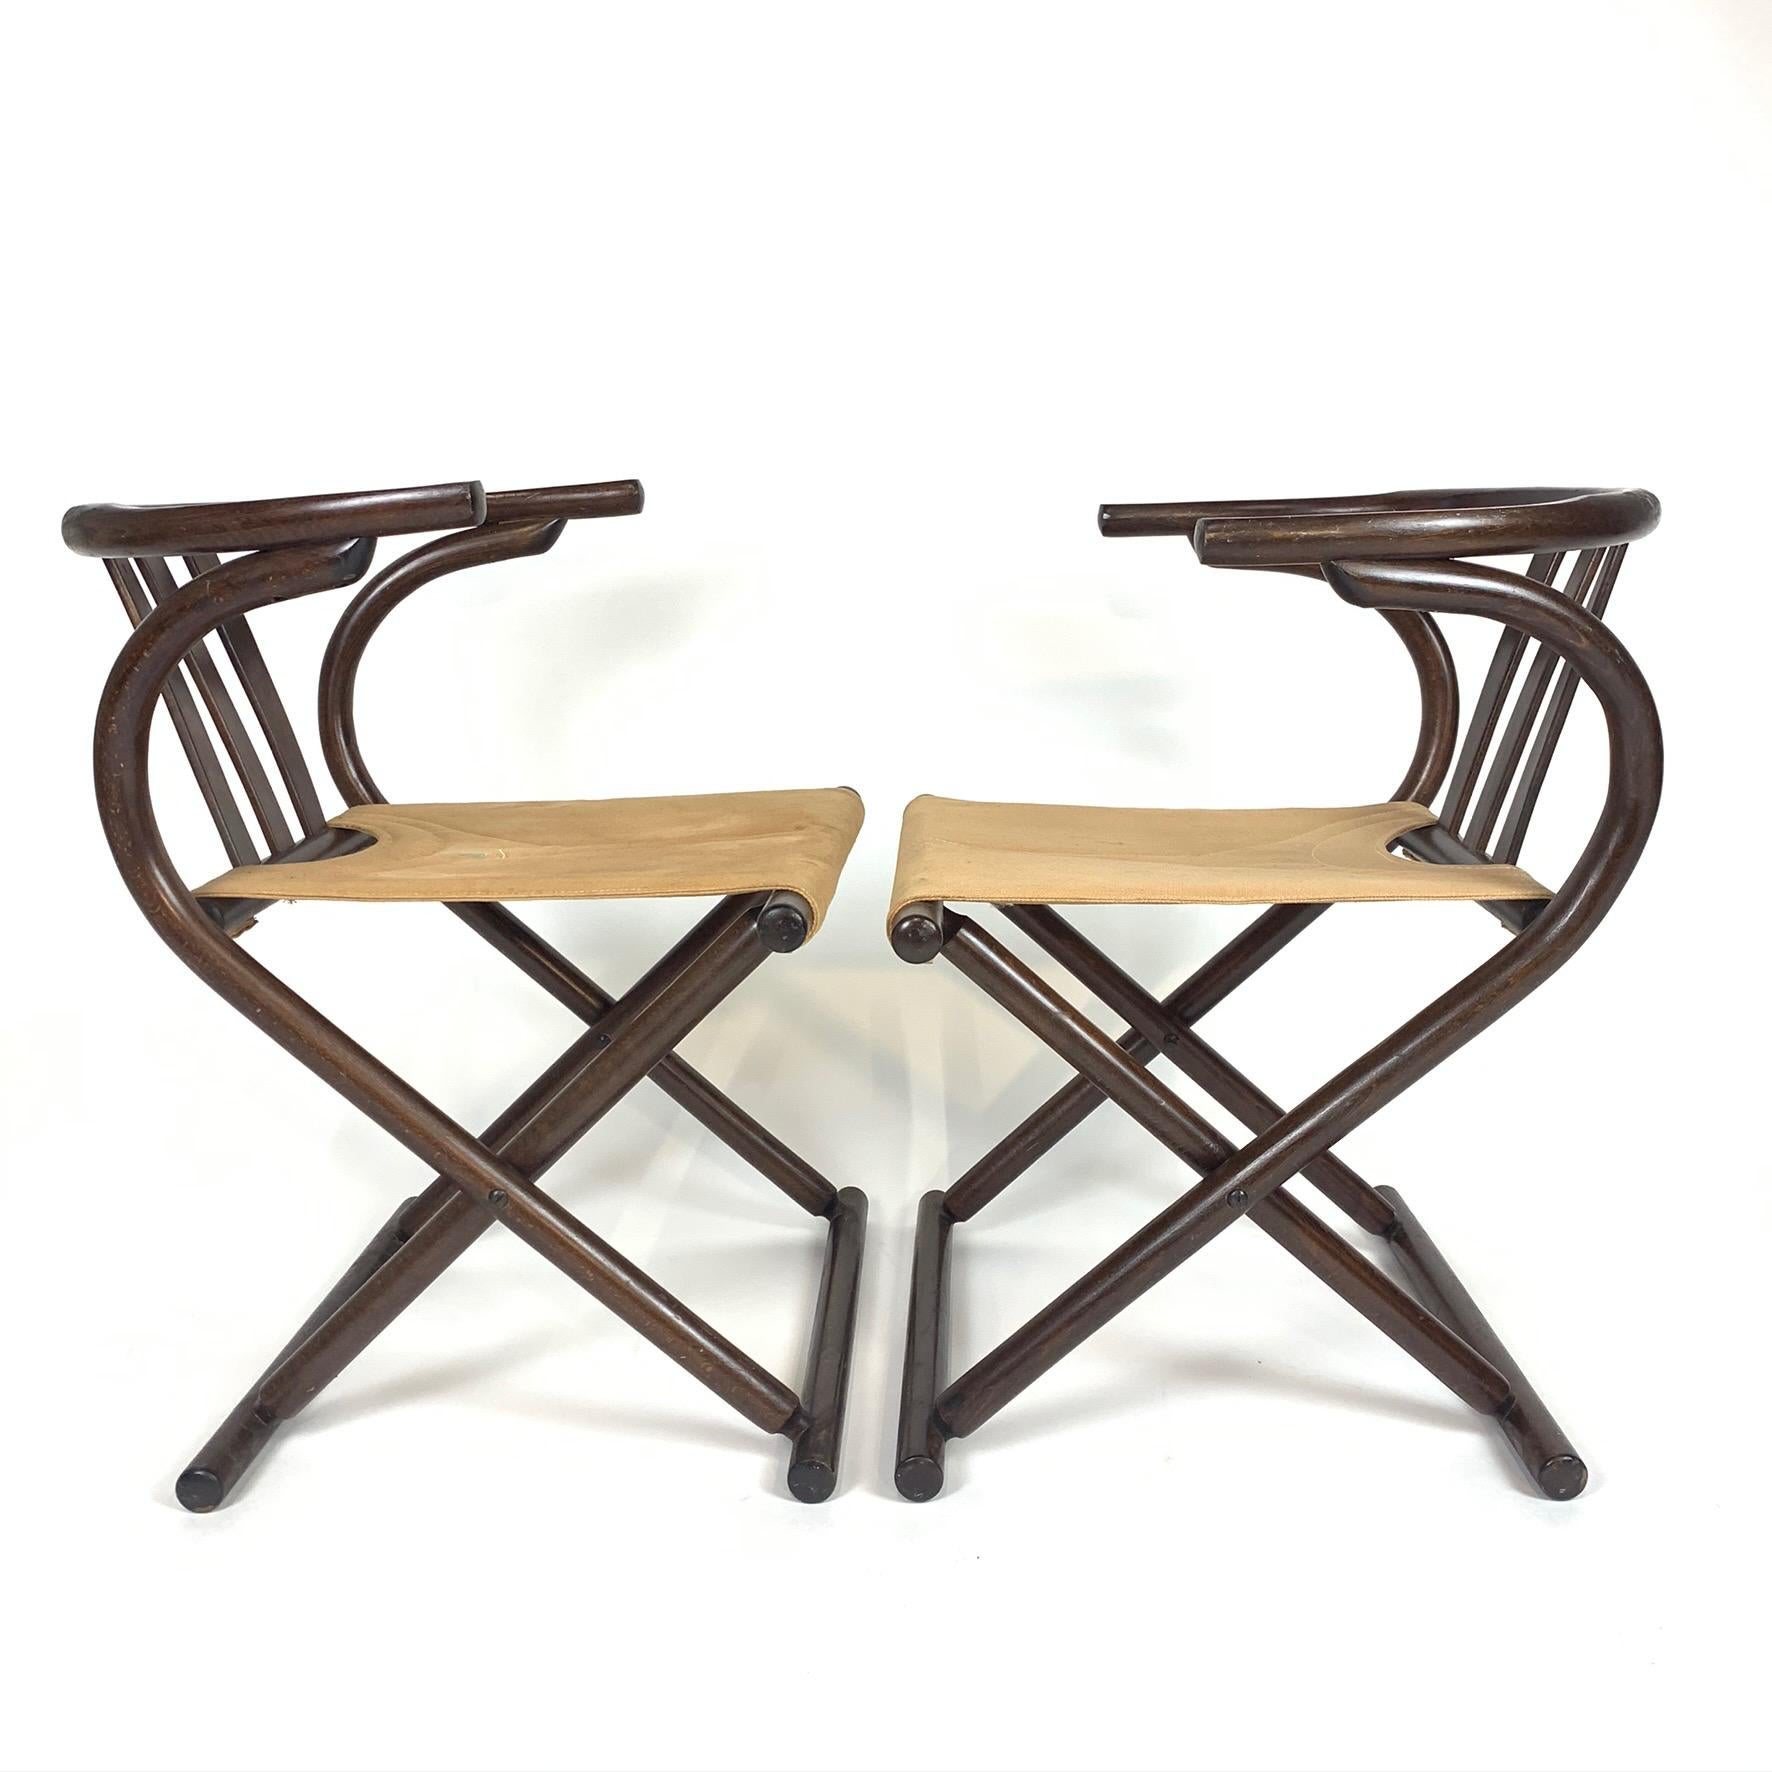 Unique pair of Thonet Mid-Century Modern bentwood chairs that fold. Dark bentwood frames with sturdy canvas seats with decorative stitching. Canvas on one chair has some discoloration as seen in photos.